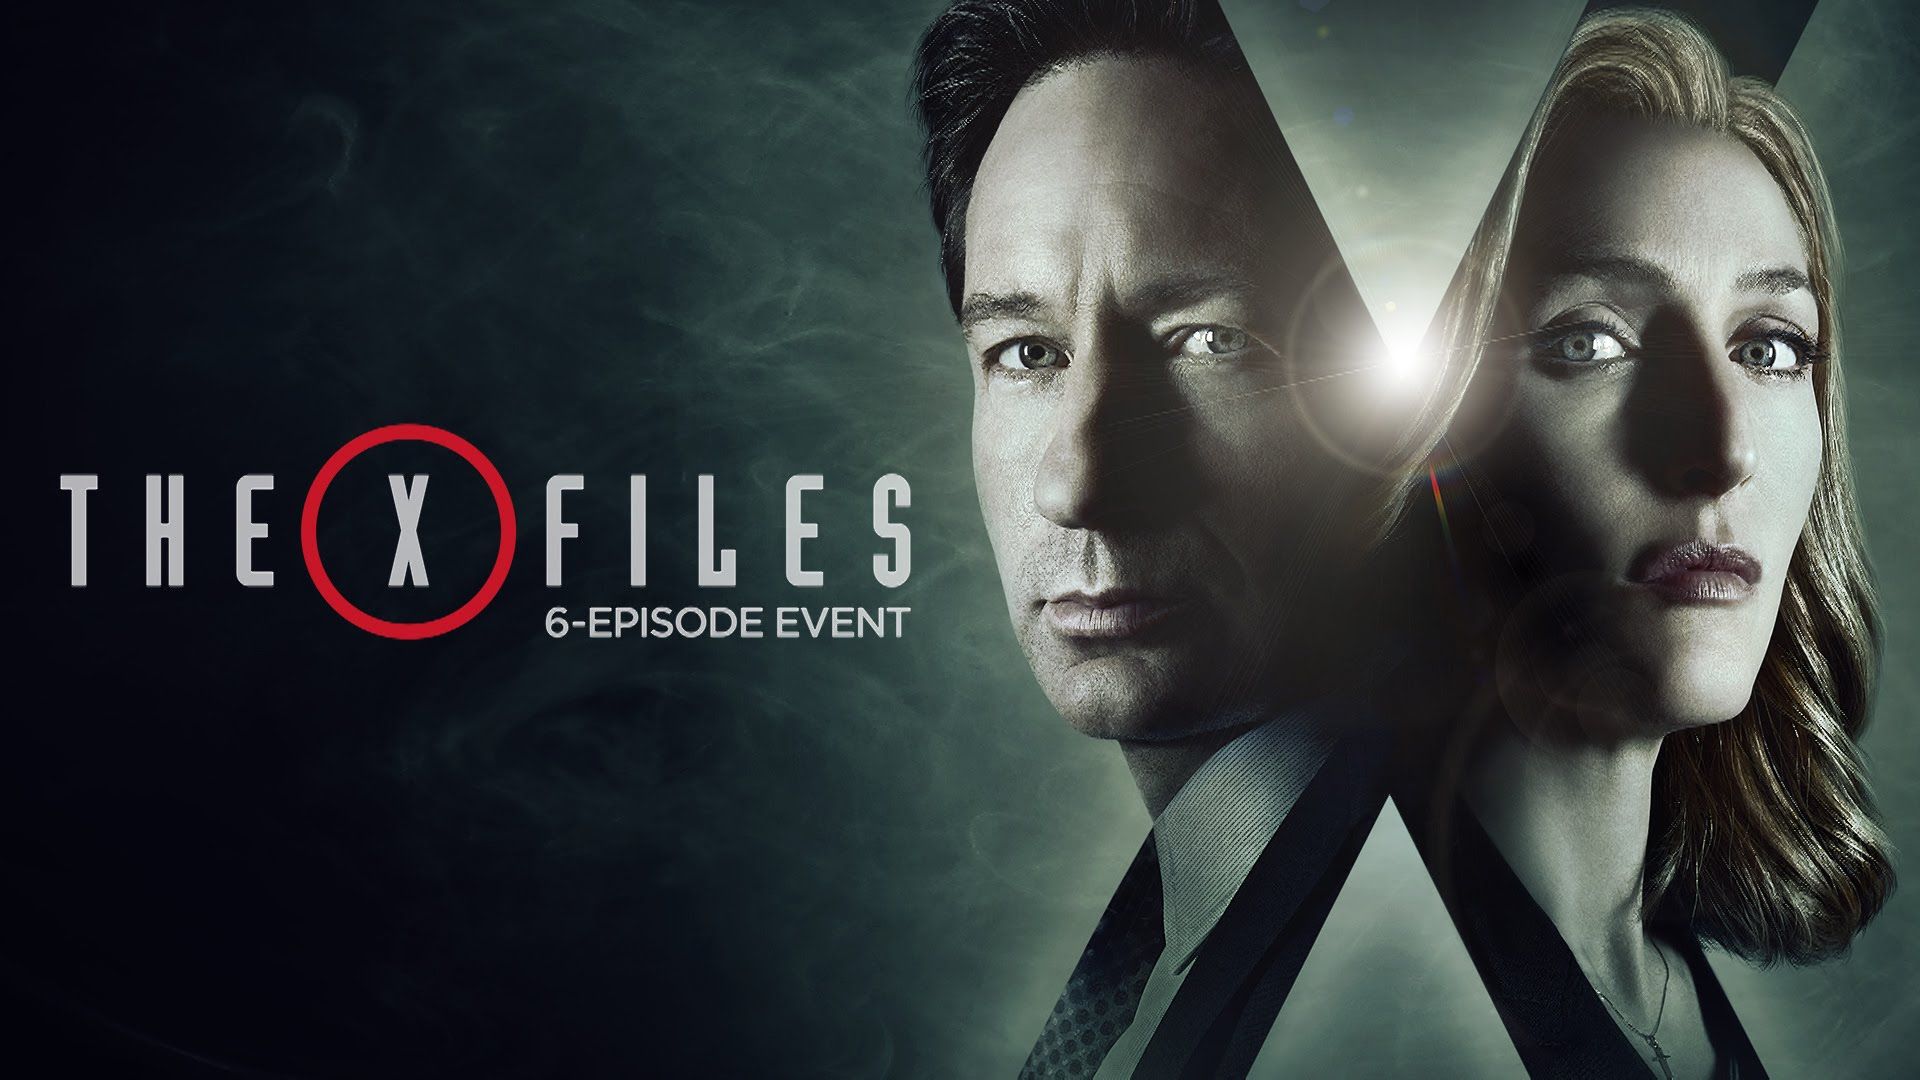 Movie Poster - The X-Files wallpaper HD. Free desktop background ...